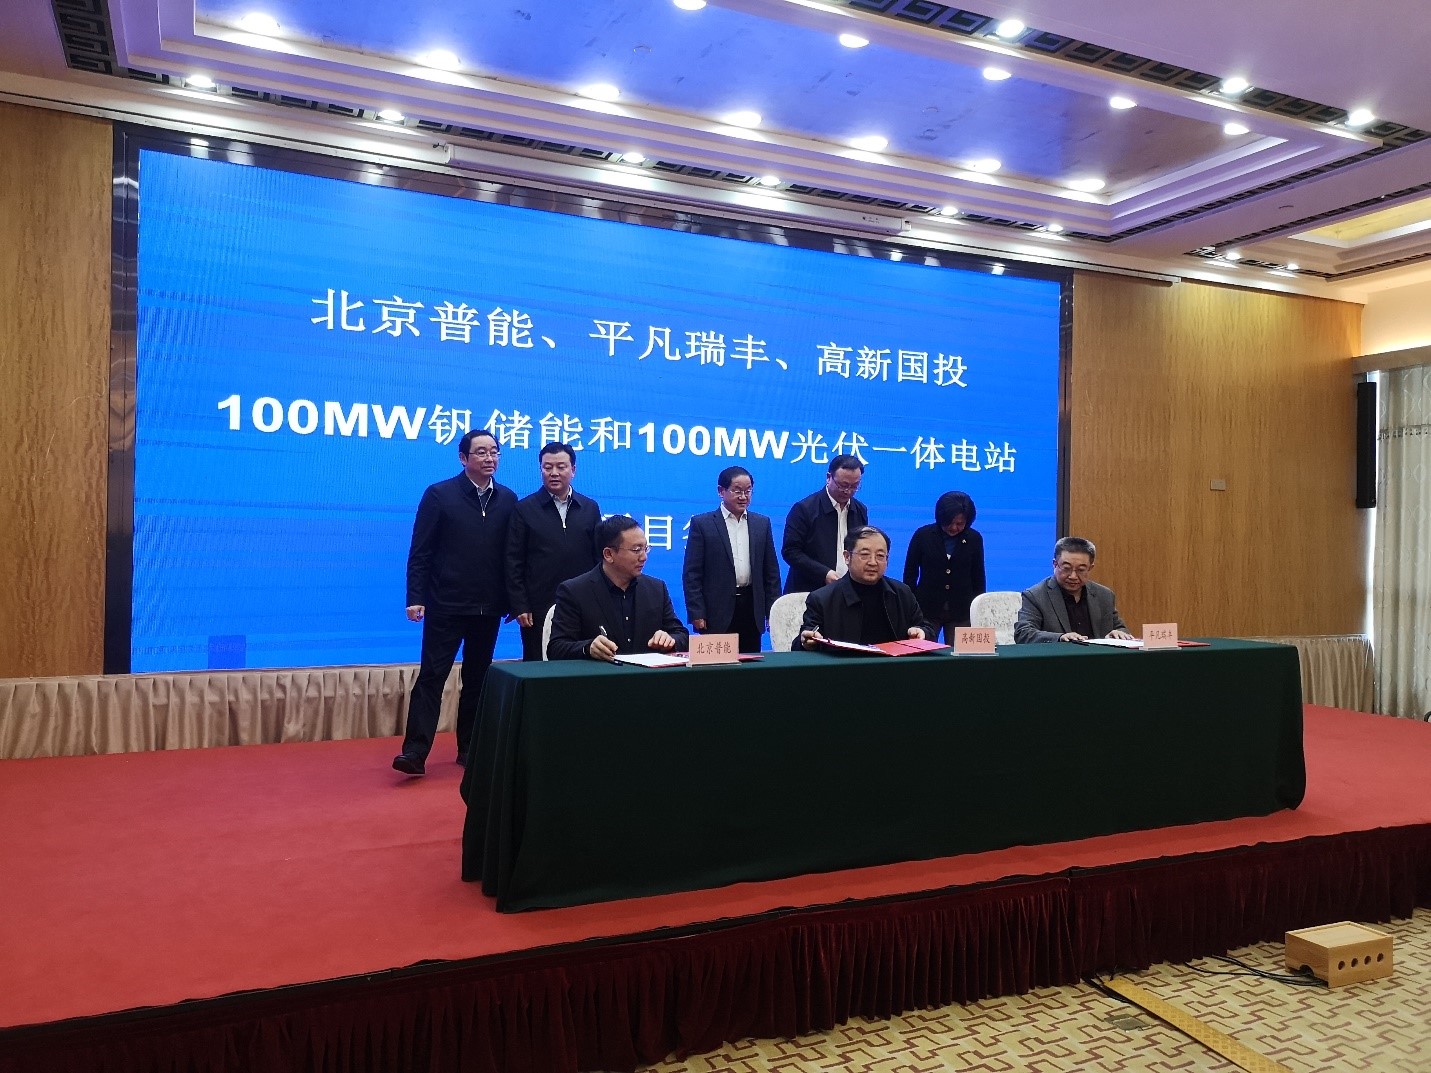 100MW Signing Ceremony March 4, 2021 in Xiangyang, Hubei